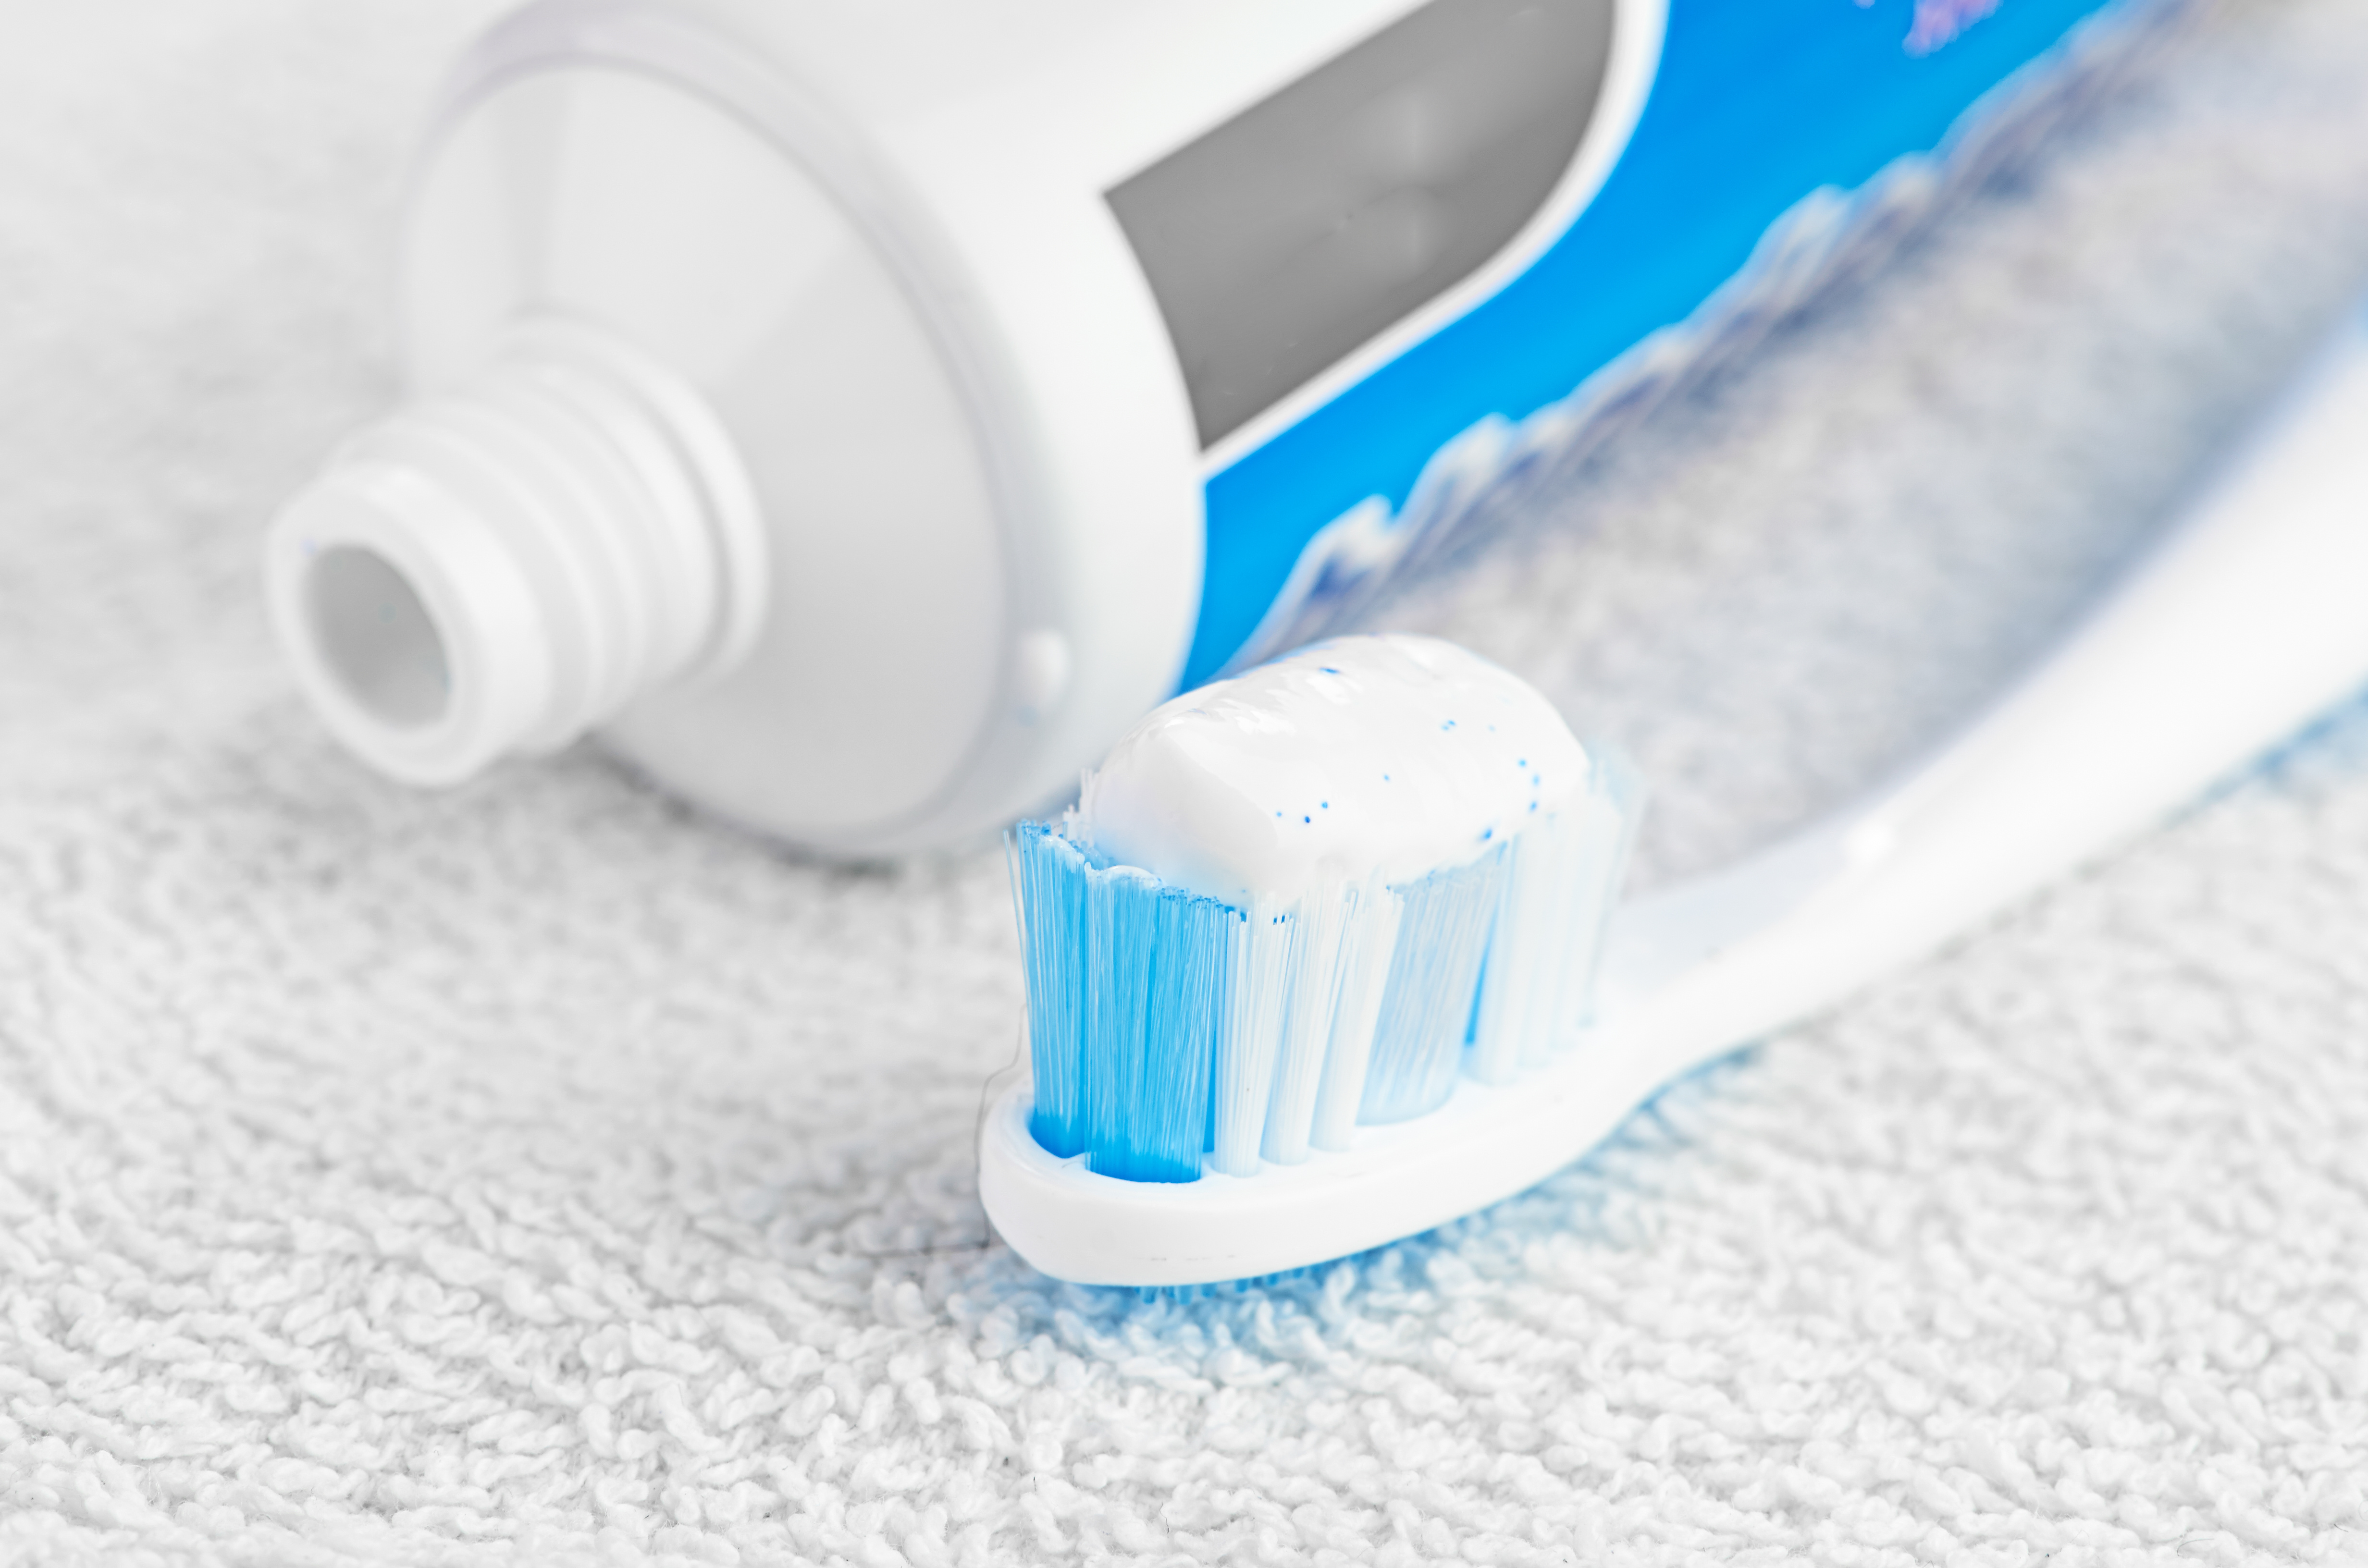 A little non-gel toothpaste works great for stain removal.